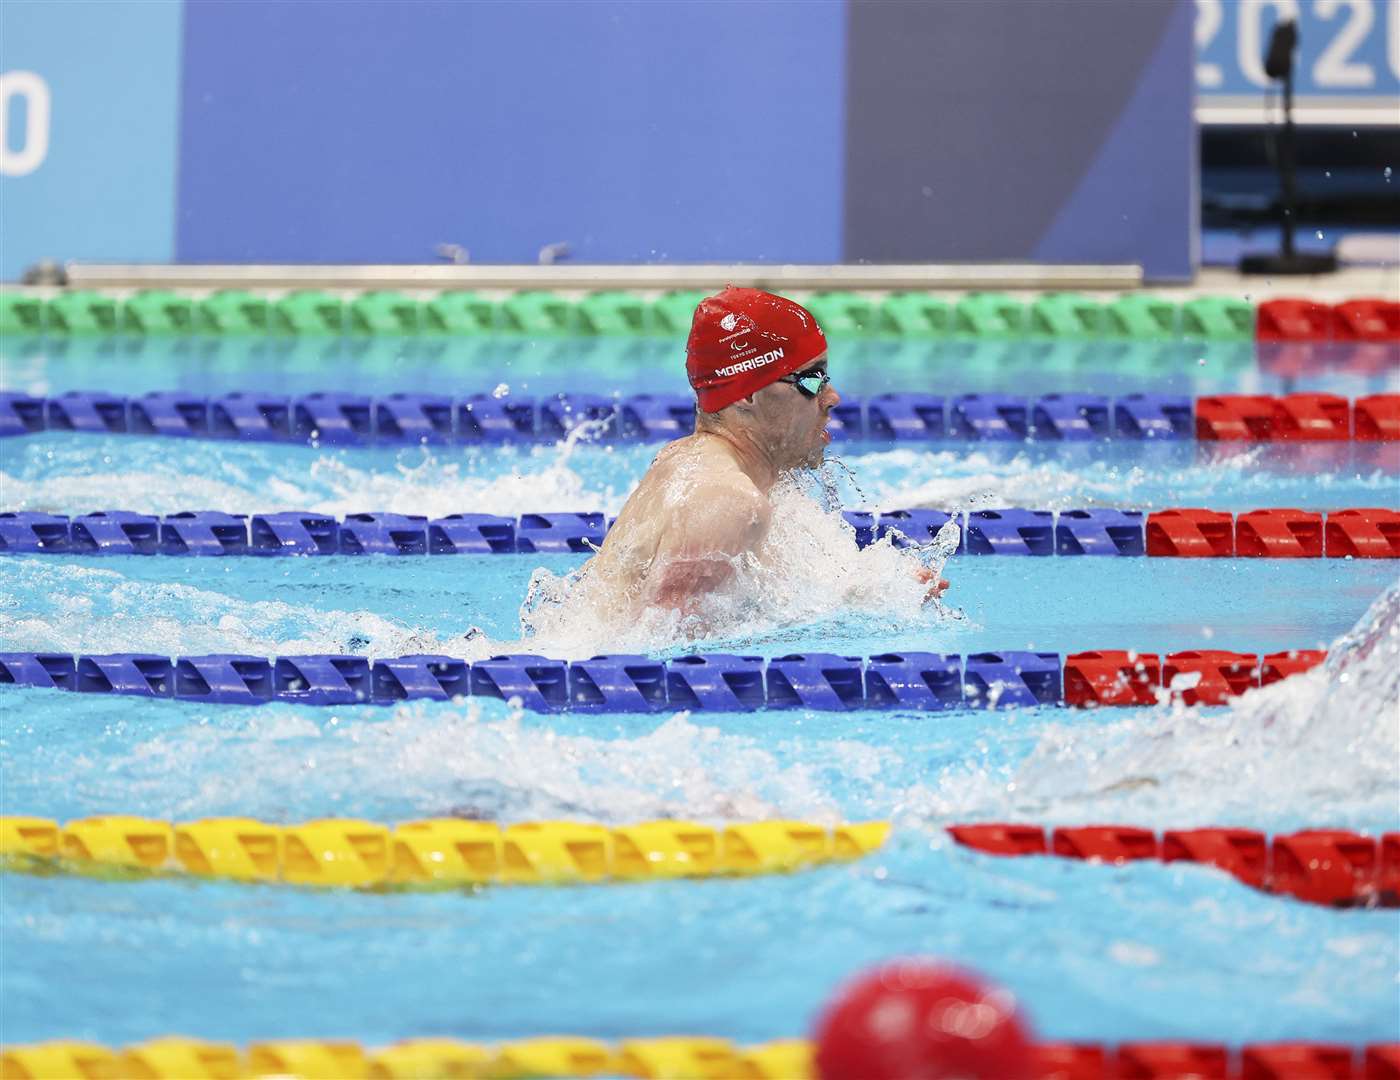 Conner in action in the final of the 100m breaststroke in Tokyo